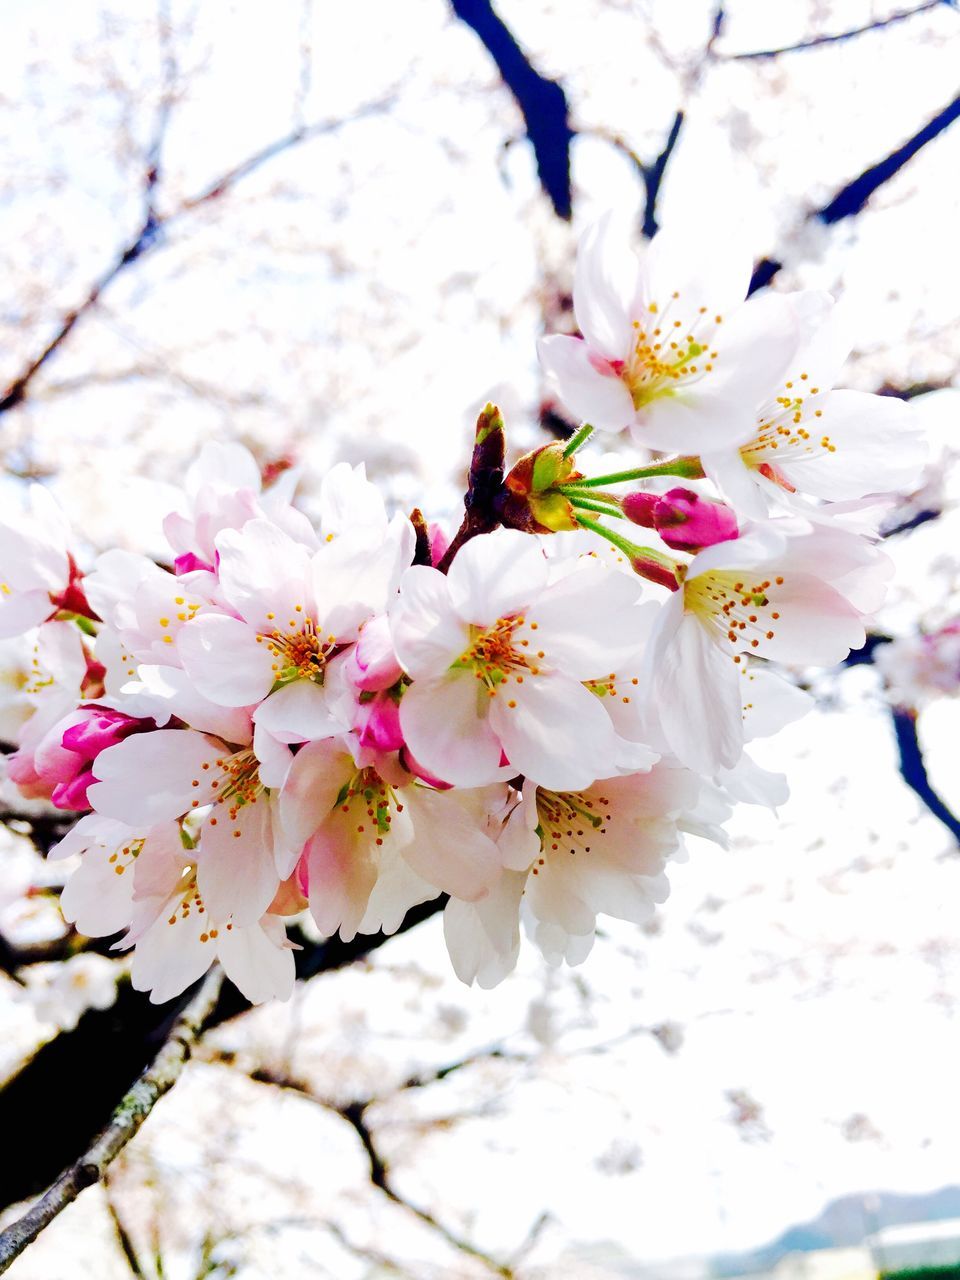 flower, freshness, fragility, petal, cherry blossom, growth, branch, beauty in nature, blossom, tree, cherry tree, white color, nature, flower head, in bloom, close-up, blooming, springtime, focus on foreground, twig